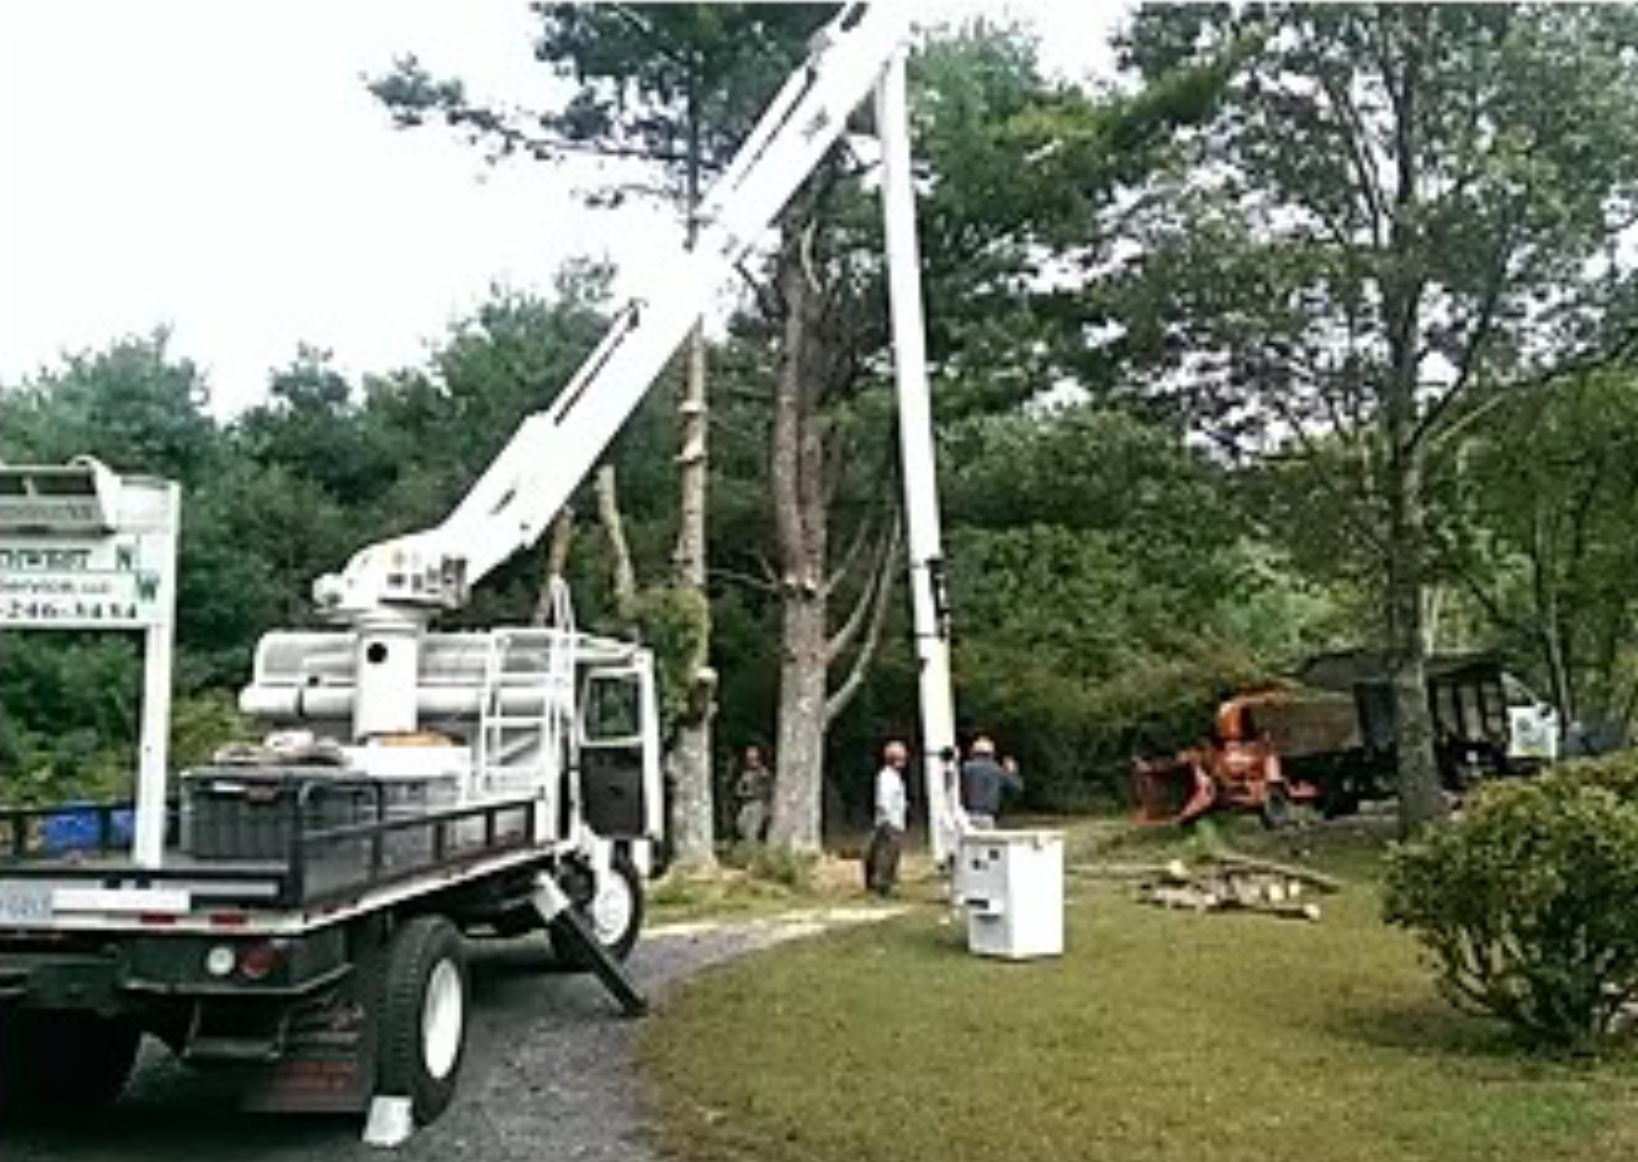 tree removal, tree removal services, tree service, tree trimming service, tree cutting service, tree trimming, tree cutting, firewood, firewood for sale, cord of wood